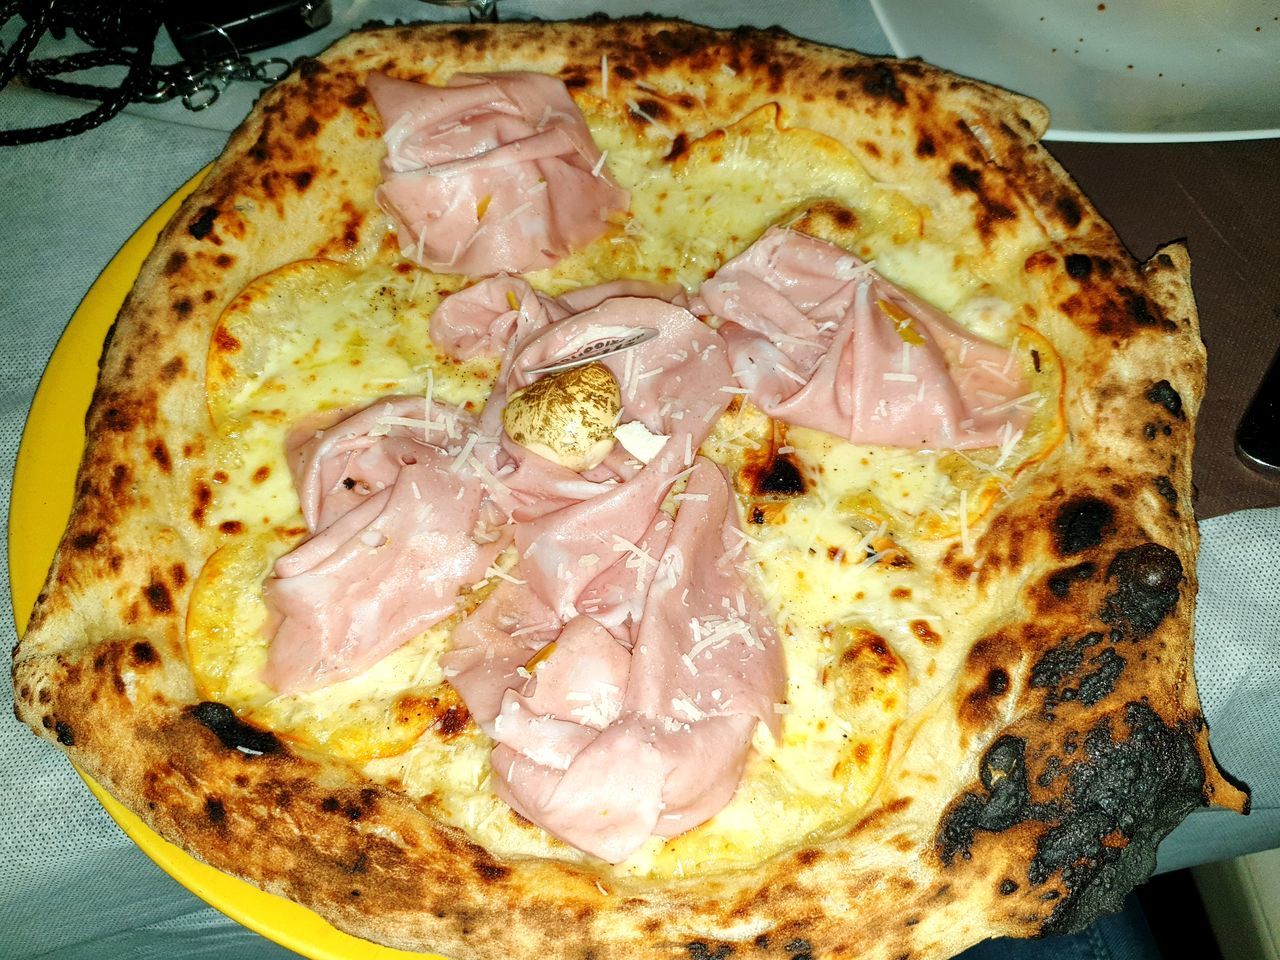 HIGH ANGLE VIEW OF PIZZA SERVED IN PLATE